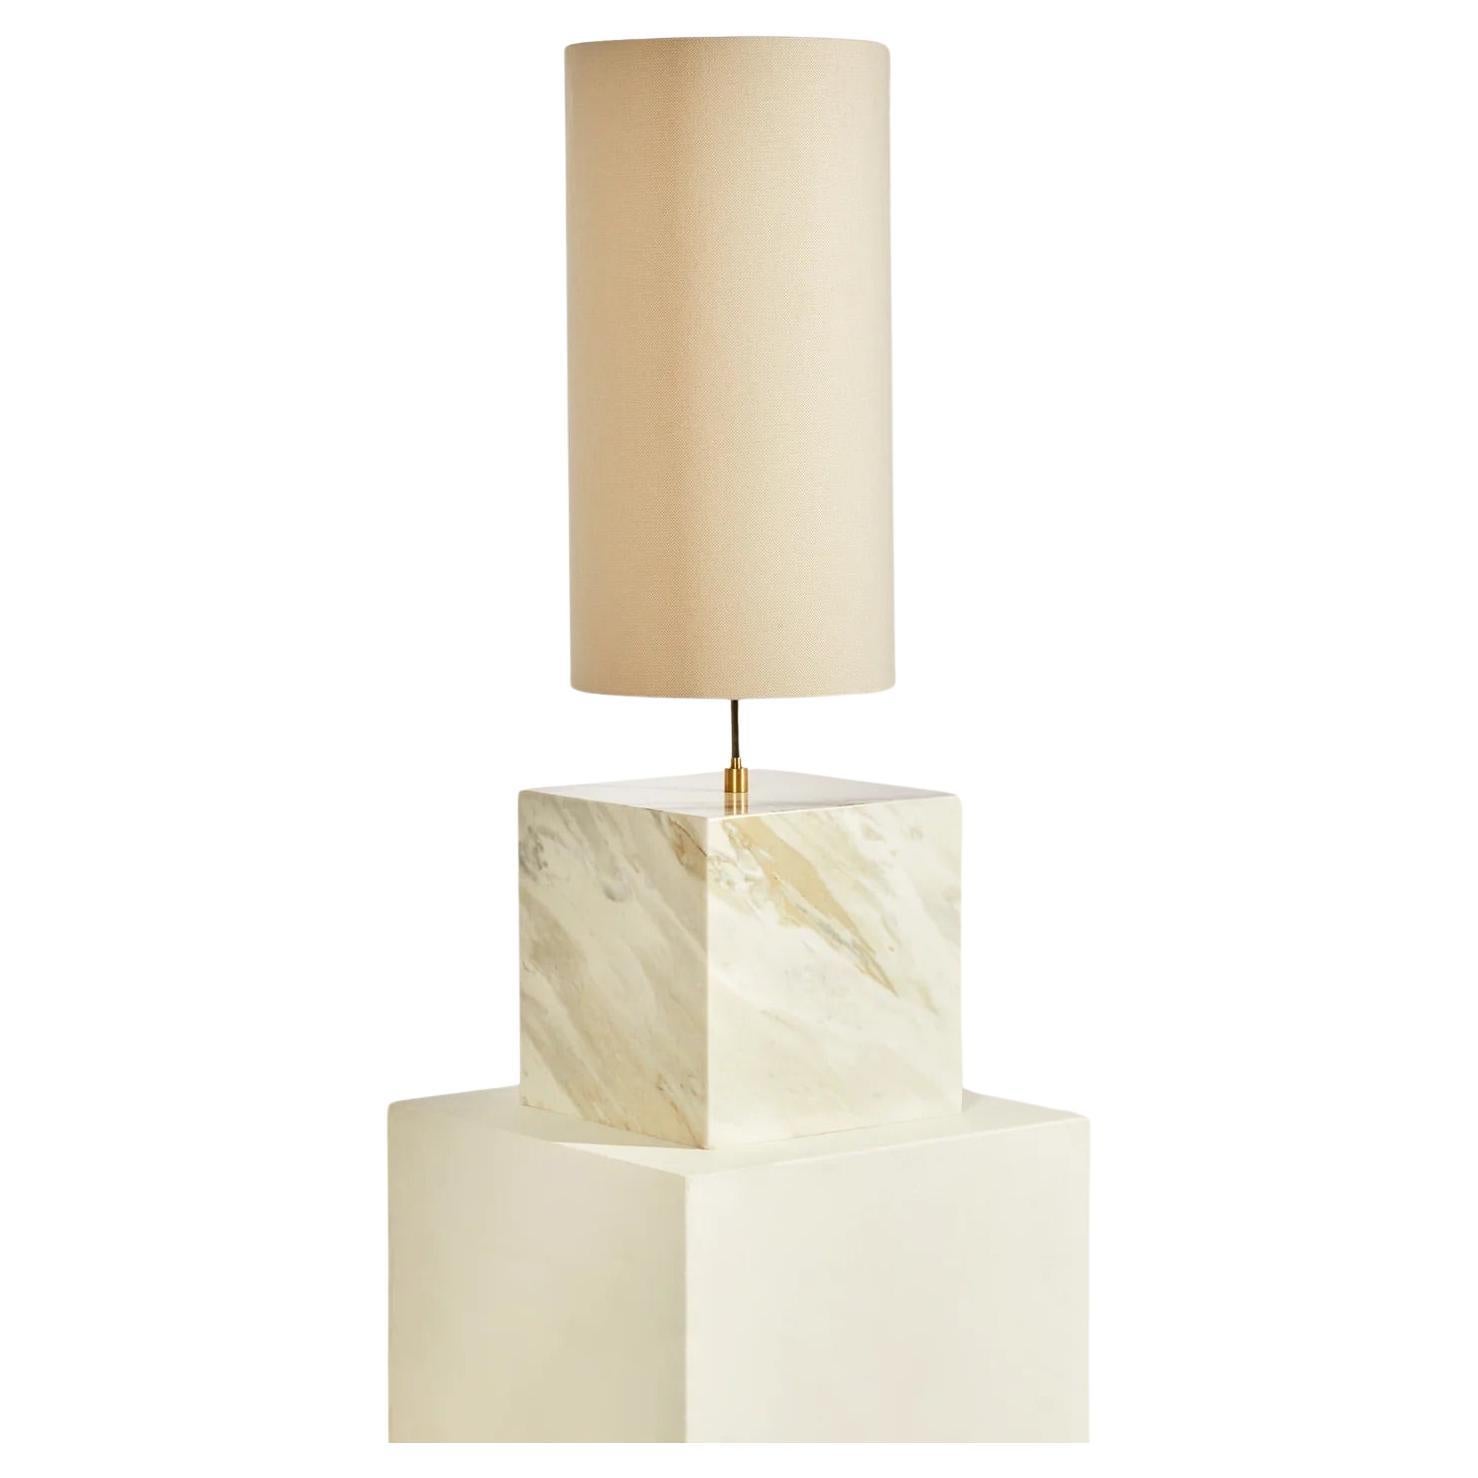 The Coexist Table Lamp is the outcome of a thoughtful design procedure that gives a new lifecycle to exquisite materials in a bold and unique way. The lamp is made entirely of recycled and long-lasting materials - the handcrafted marble base is